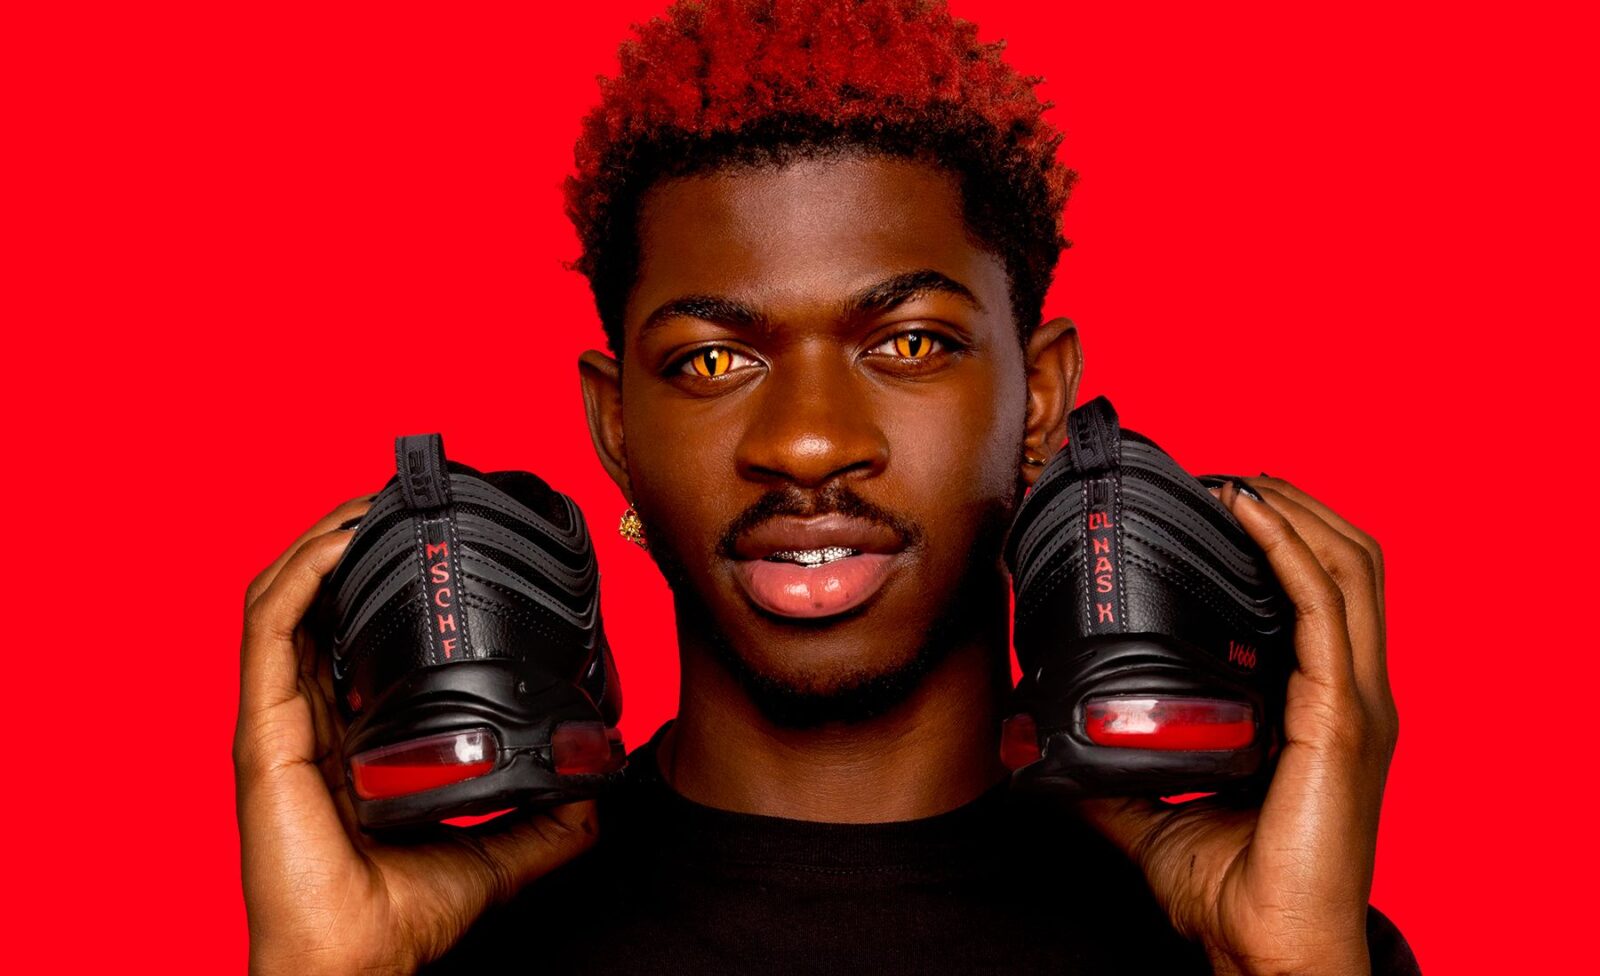 LIL NAS X CANCELED FOR BLASPHEMY AND DISRESPECT NOW! – Kenneth Keith